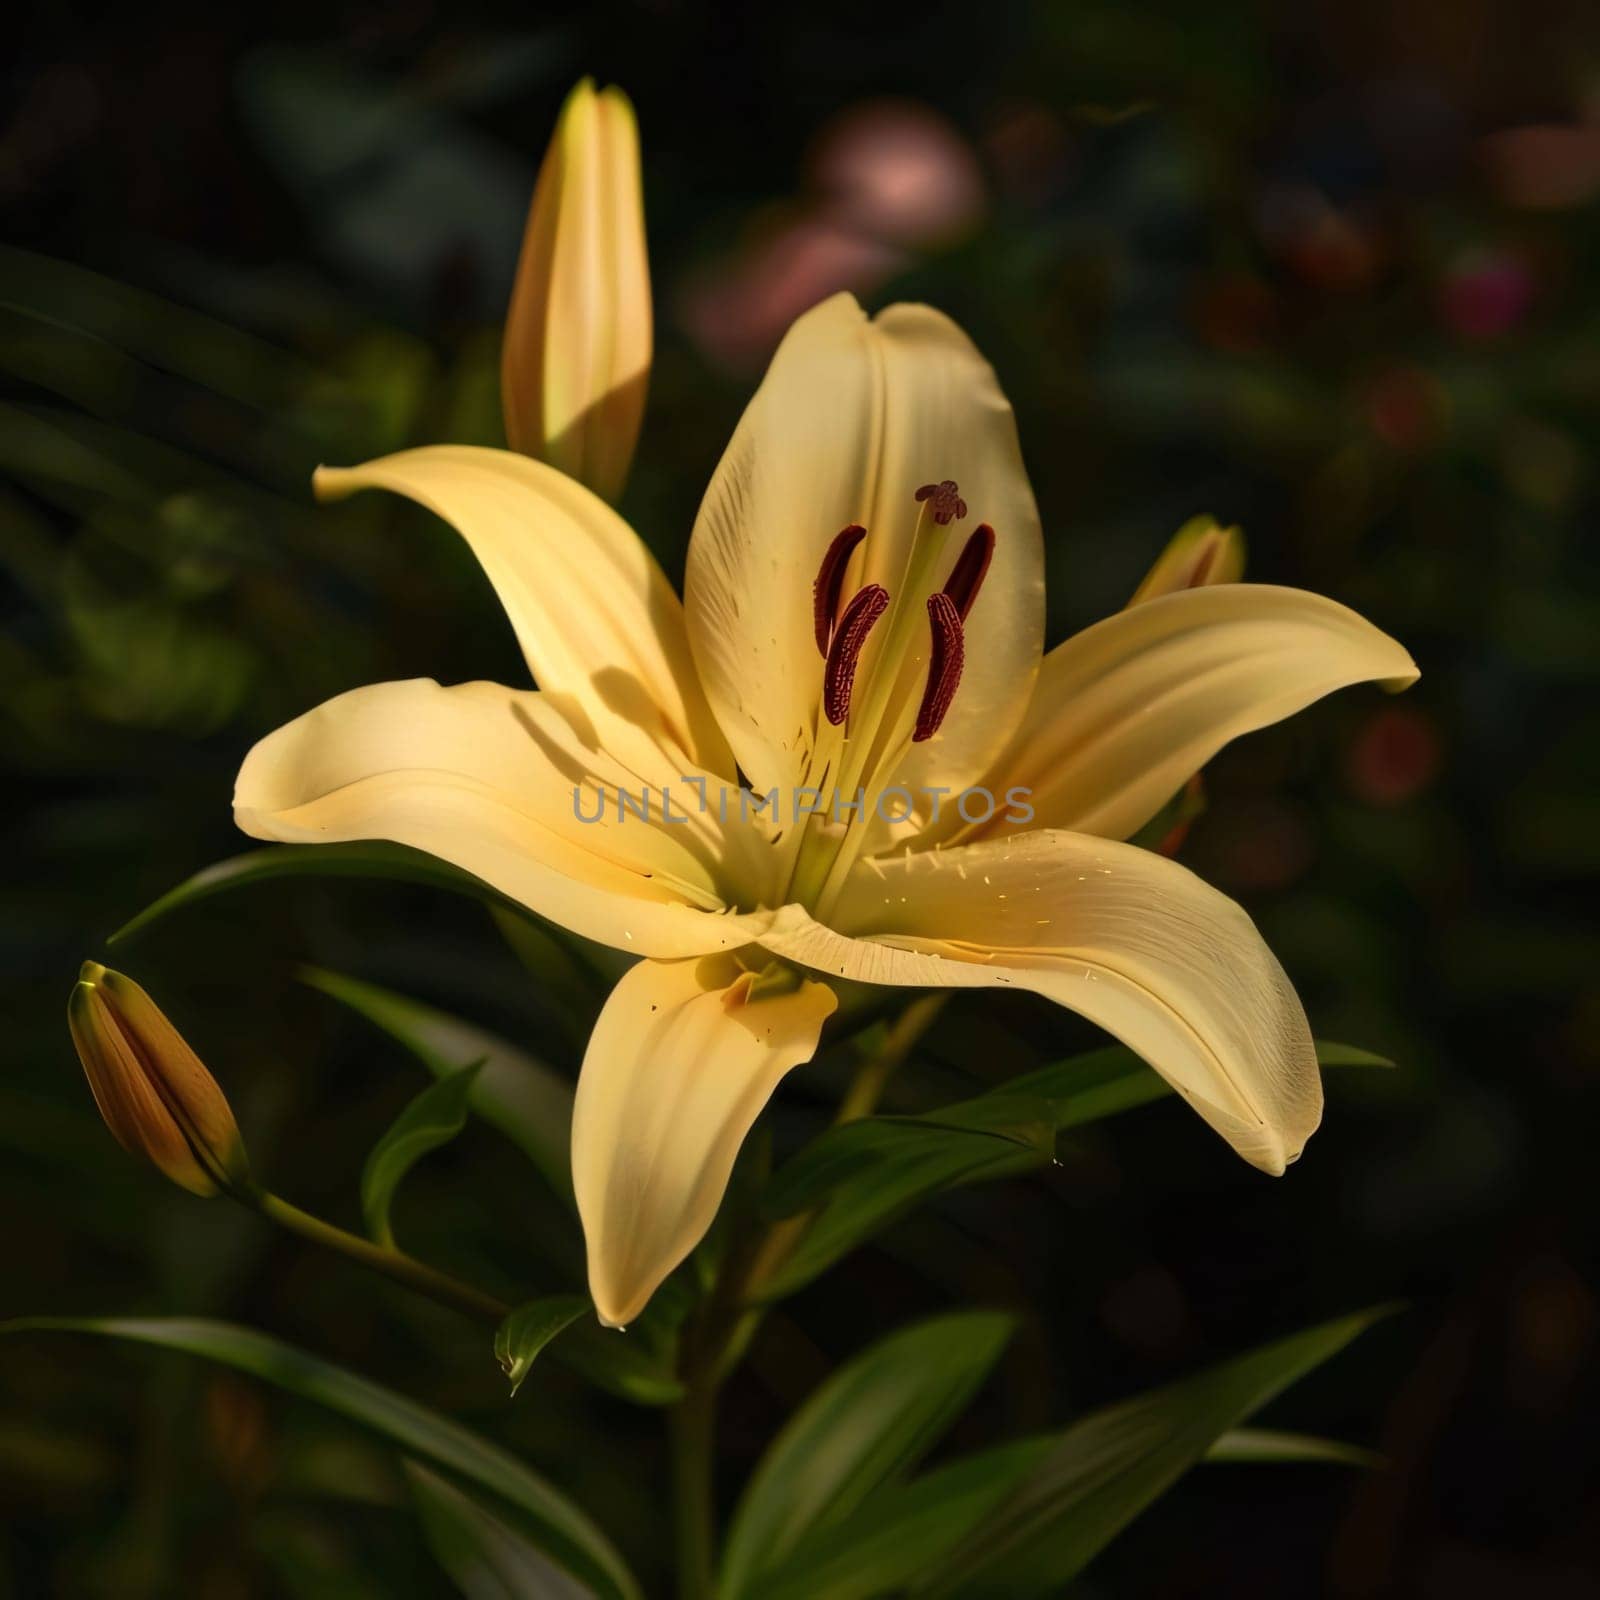 Yellow lily on a dark background close-up view. Flowering flowers, a symbol of spring, new life. by ThemesS